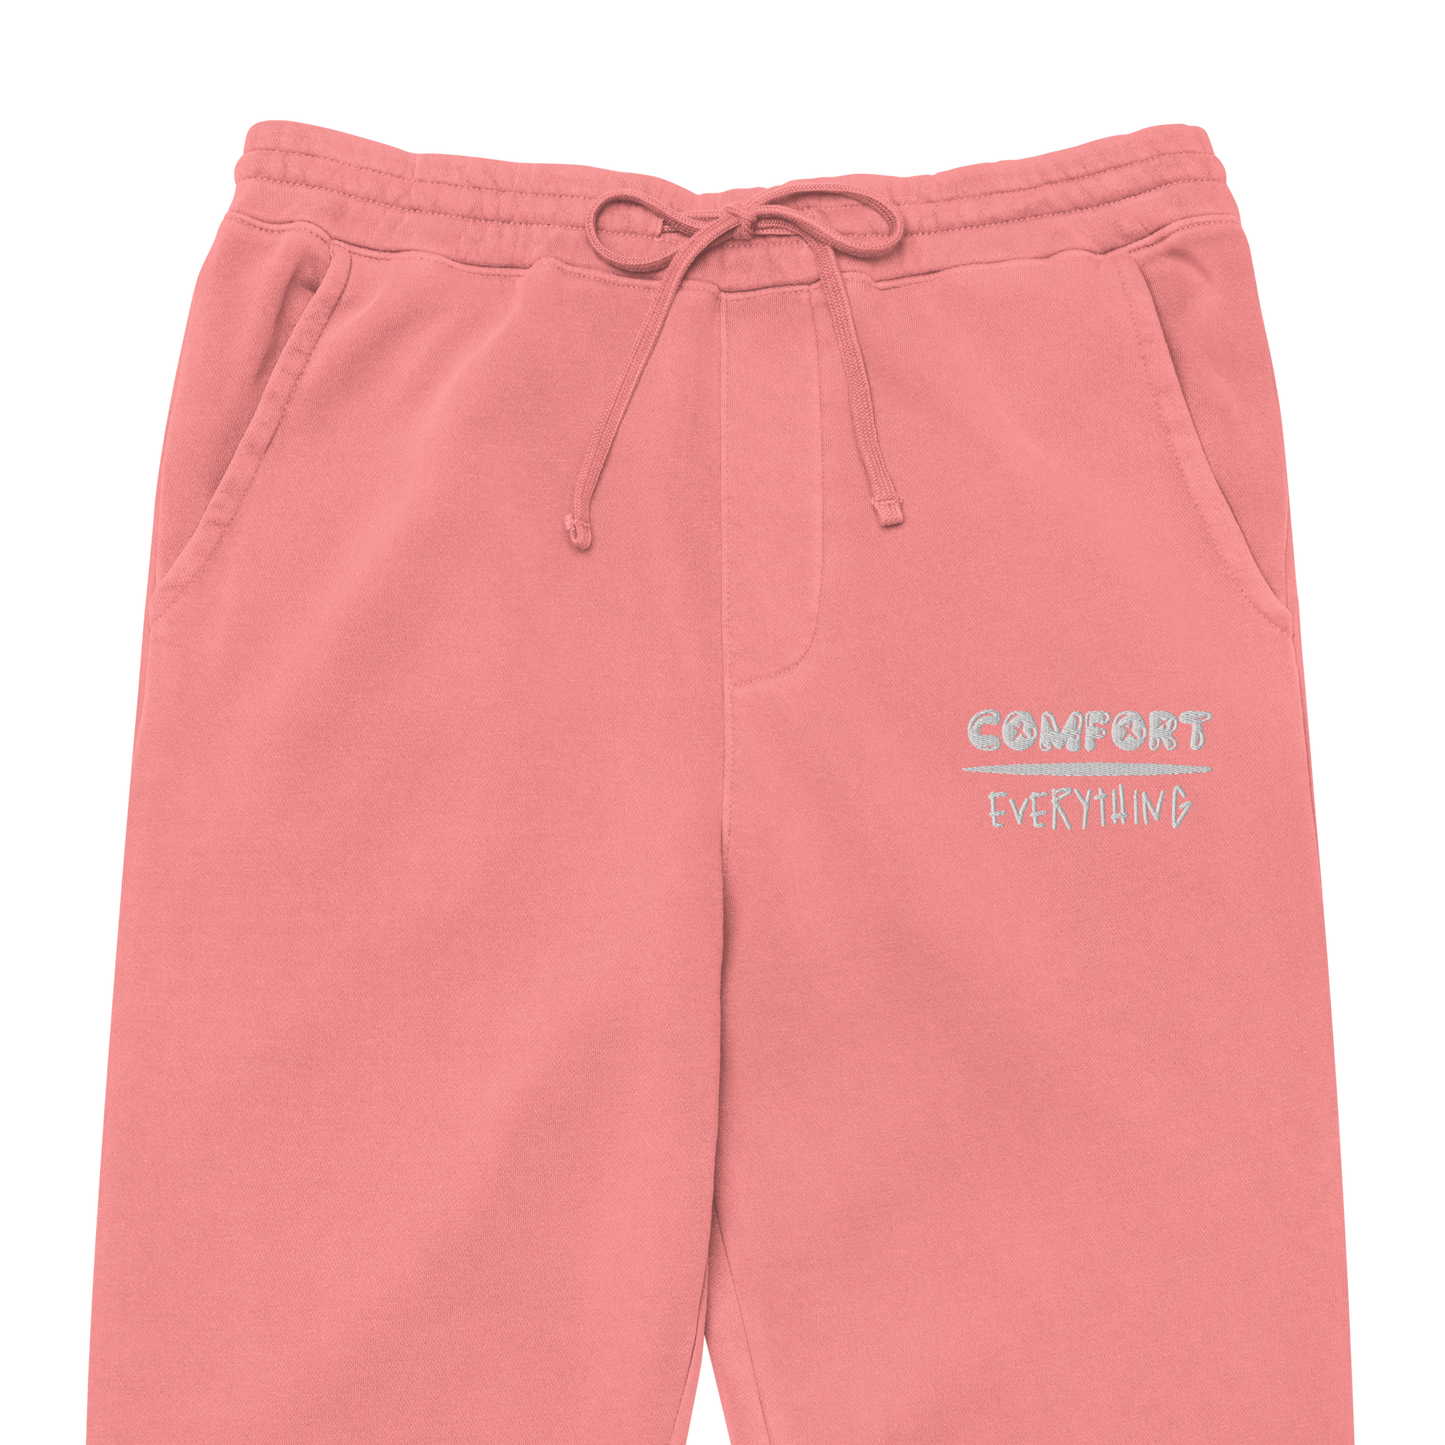 Comfort Over Everything pigment-dyed sweatpants